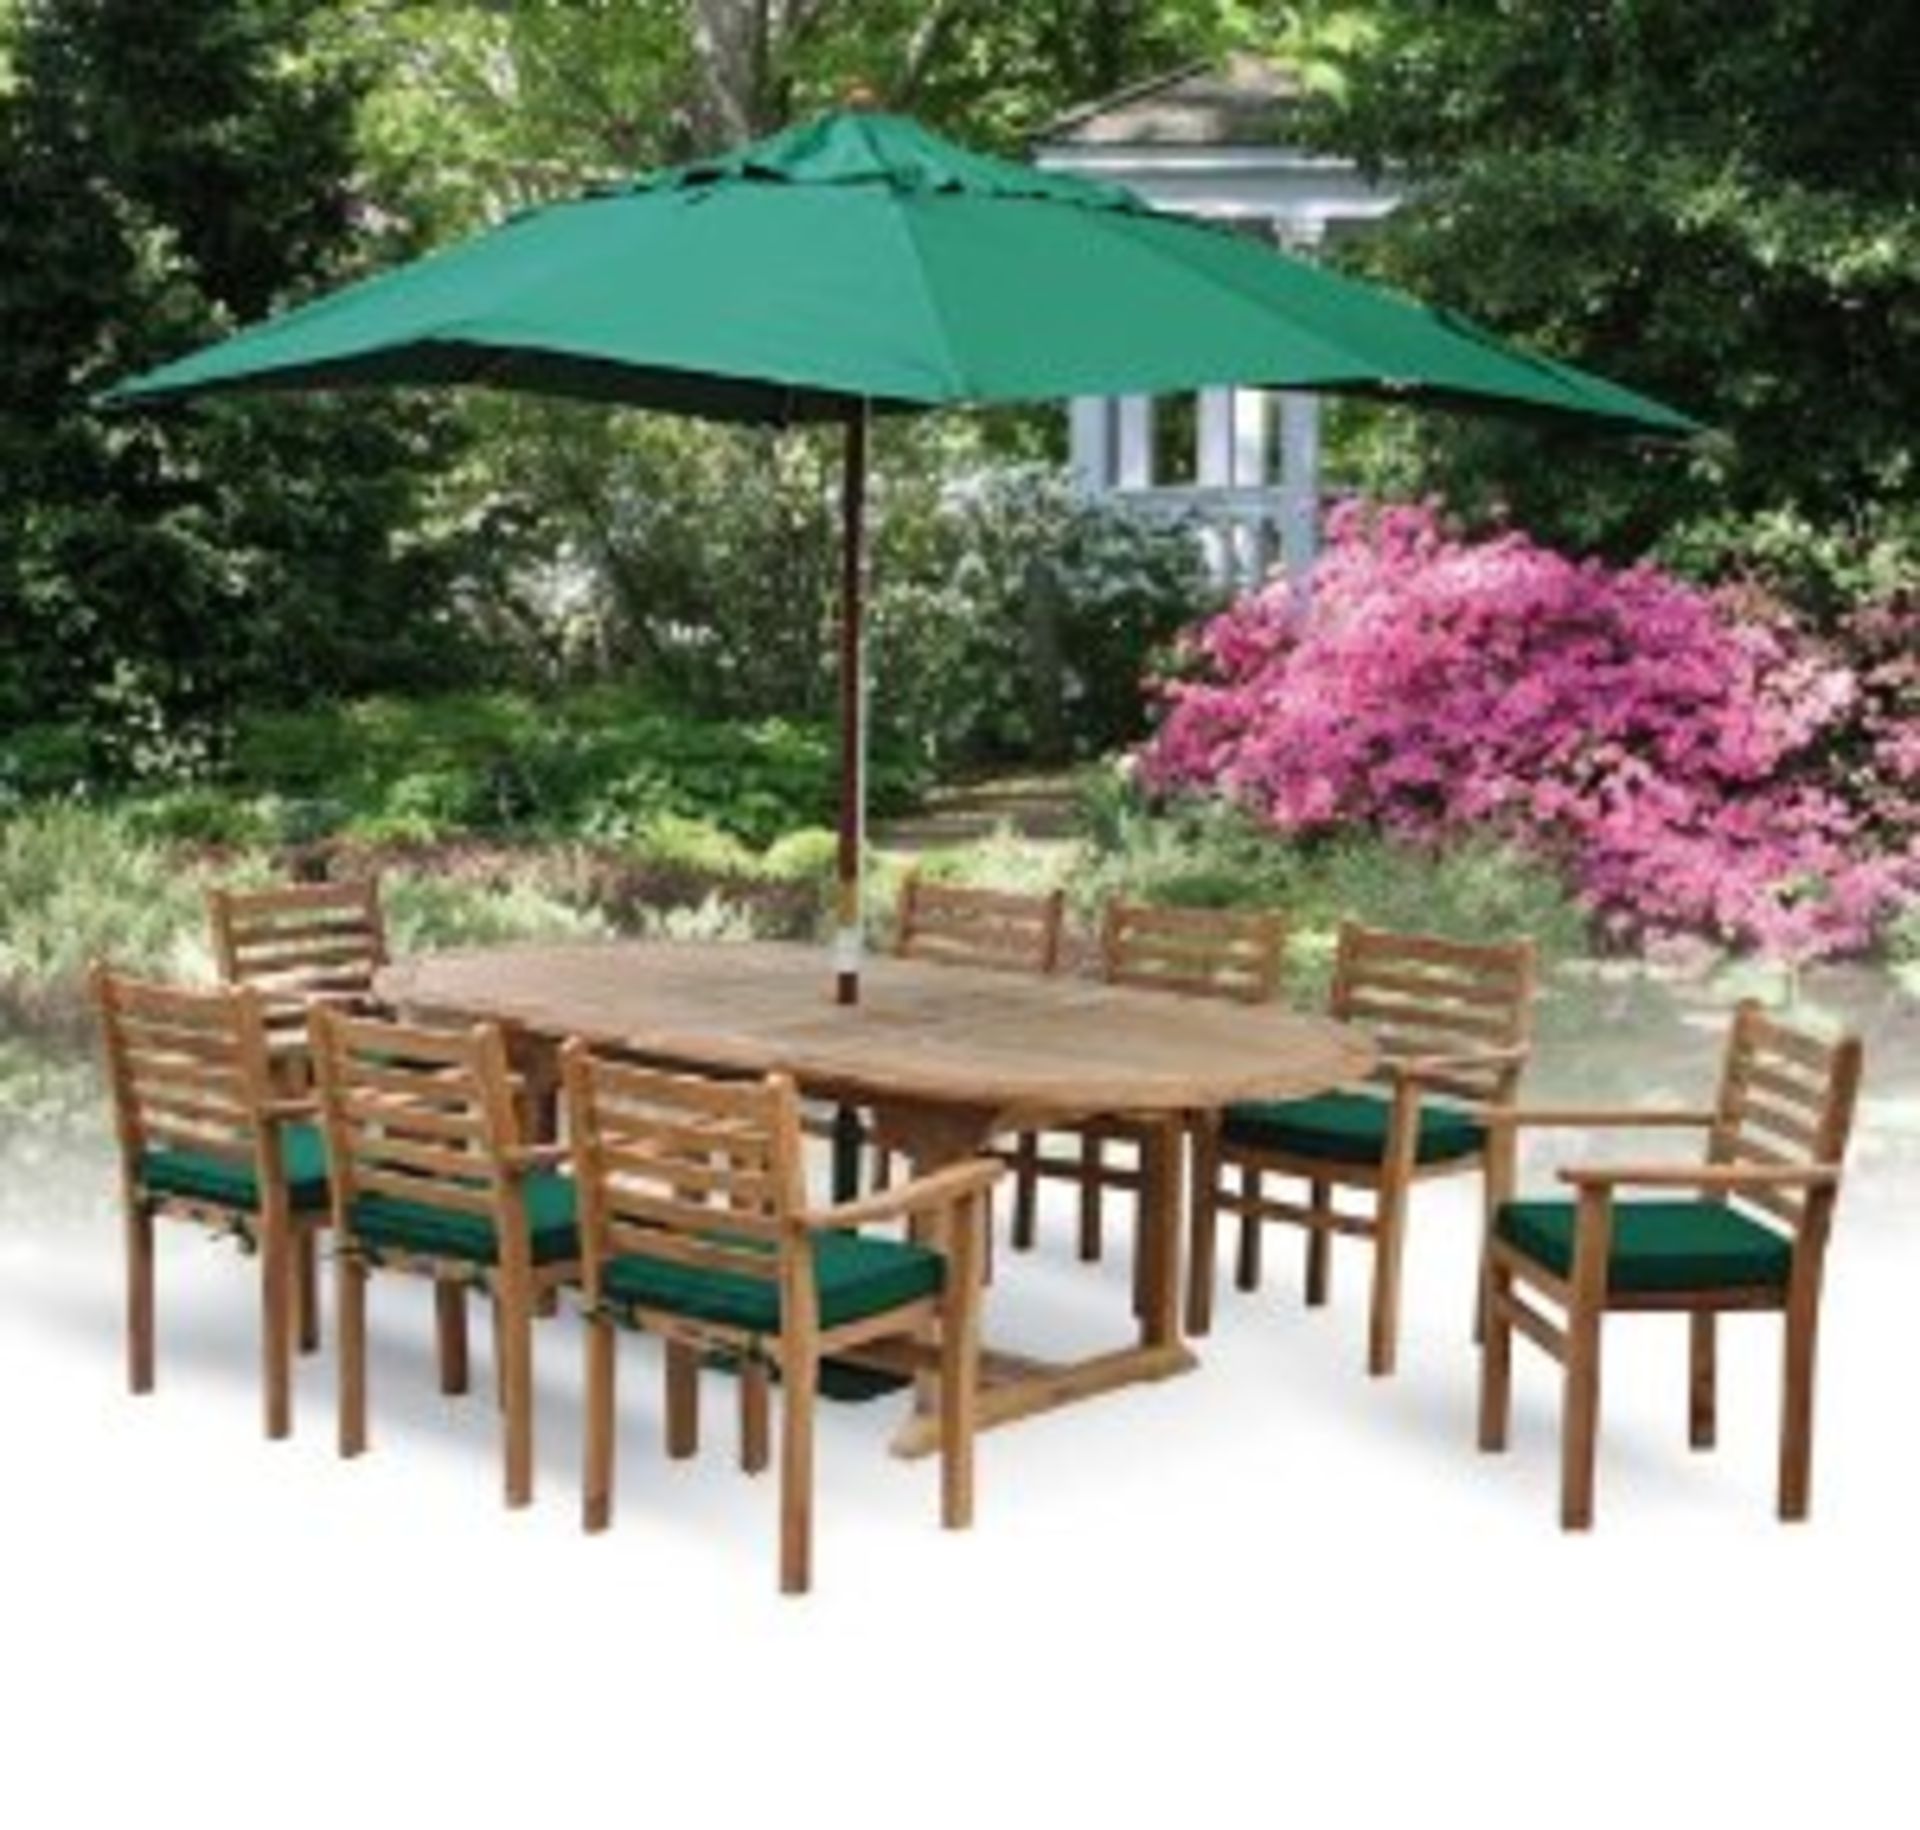 V Brand New Teak Extended Oval Table Set Allows For Up To 8 People including 8 stacking chairs and 8